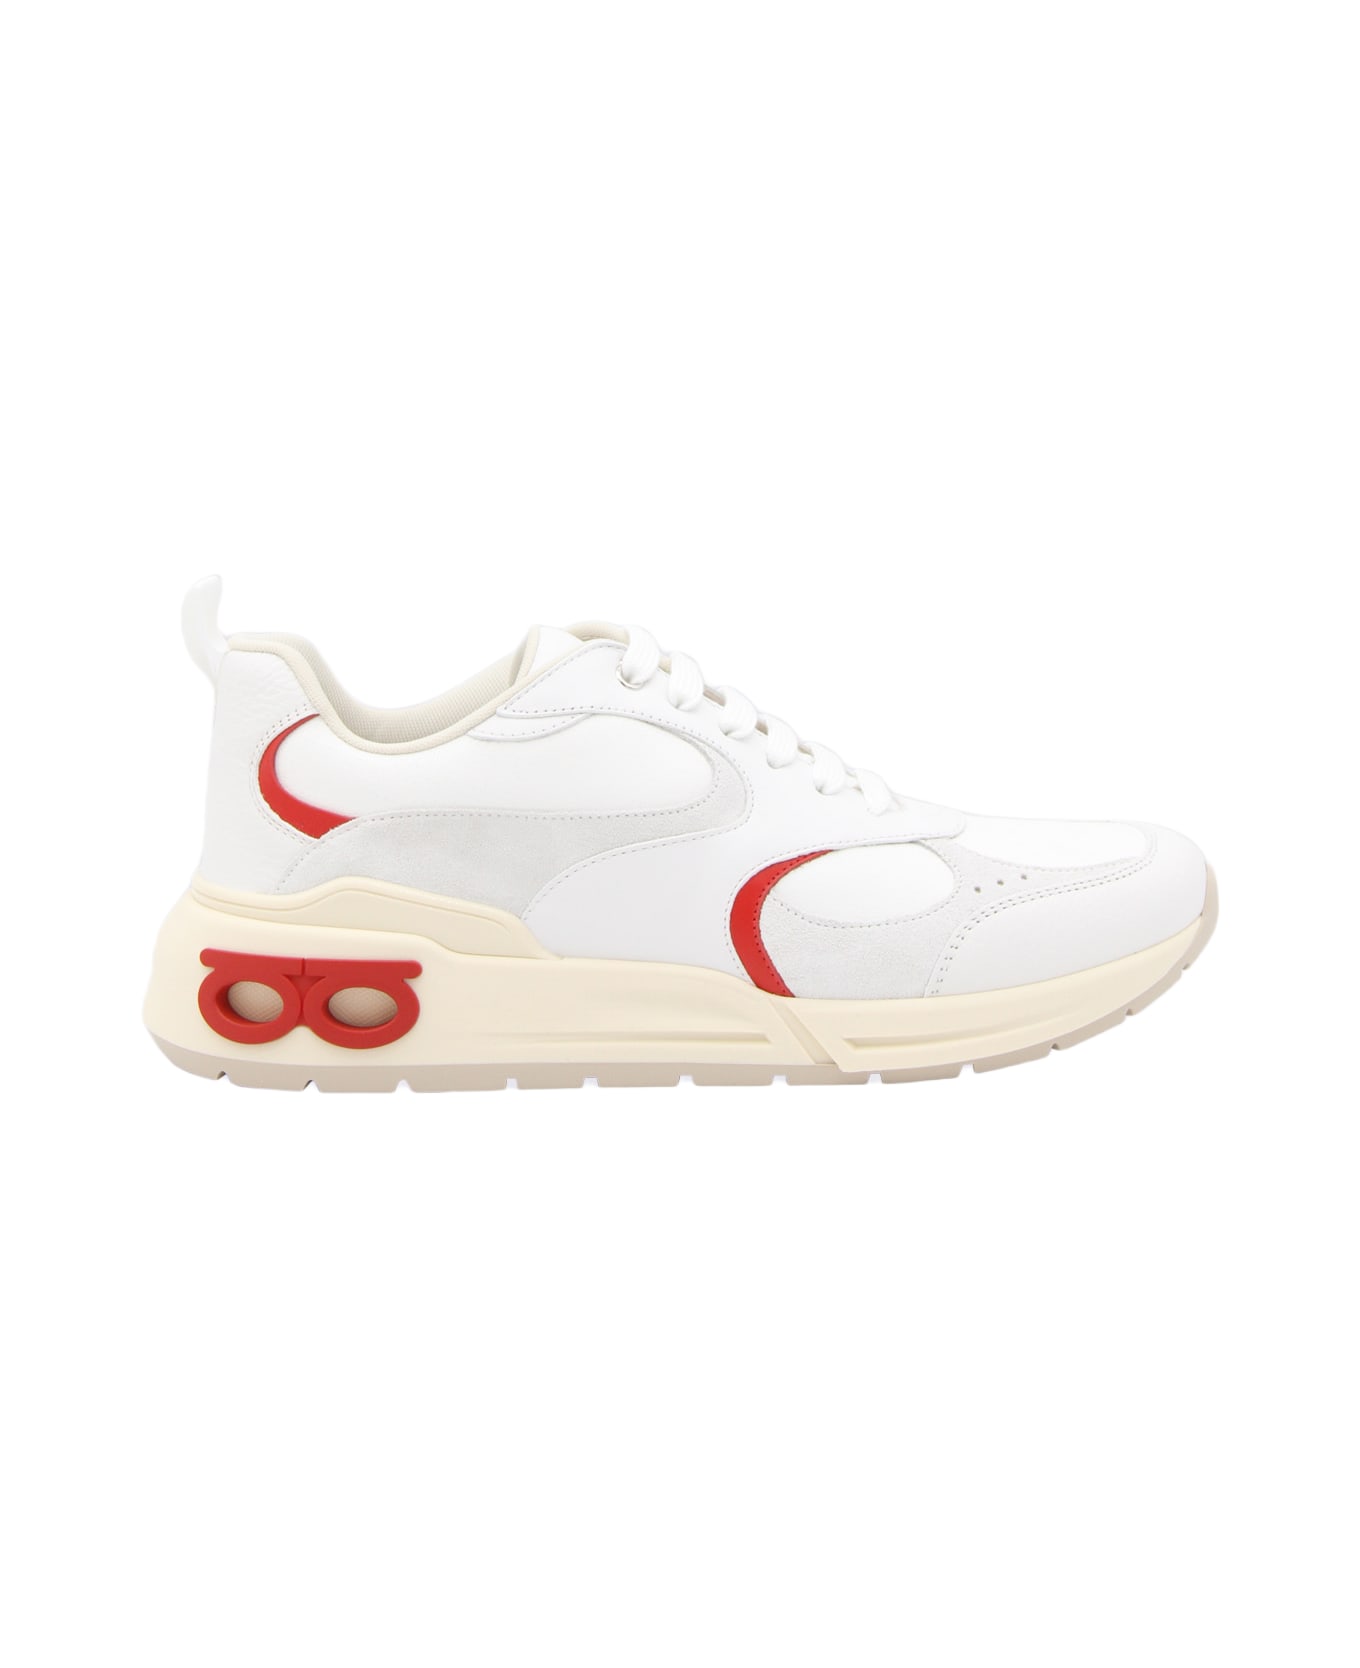 Ferragamo White And Red Leather Sneakers - White スニーカー